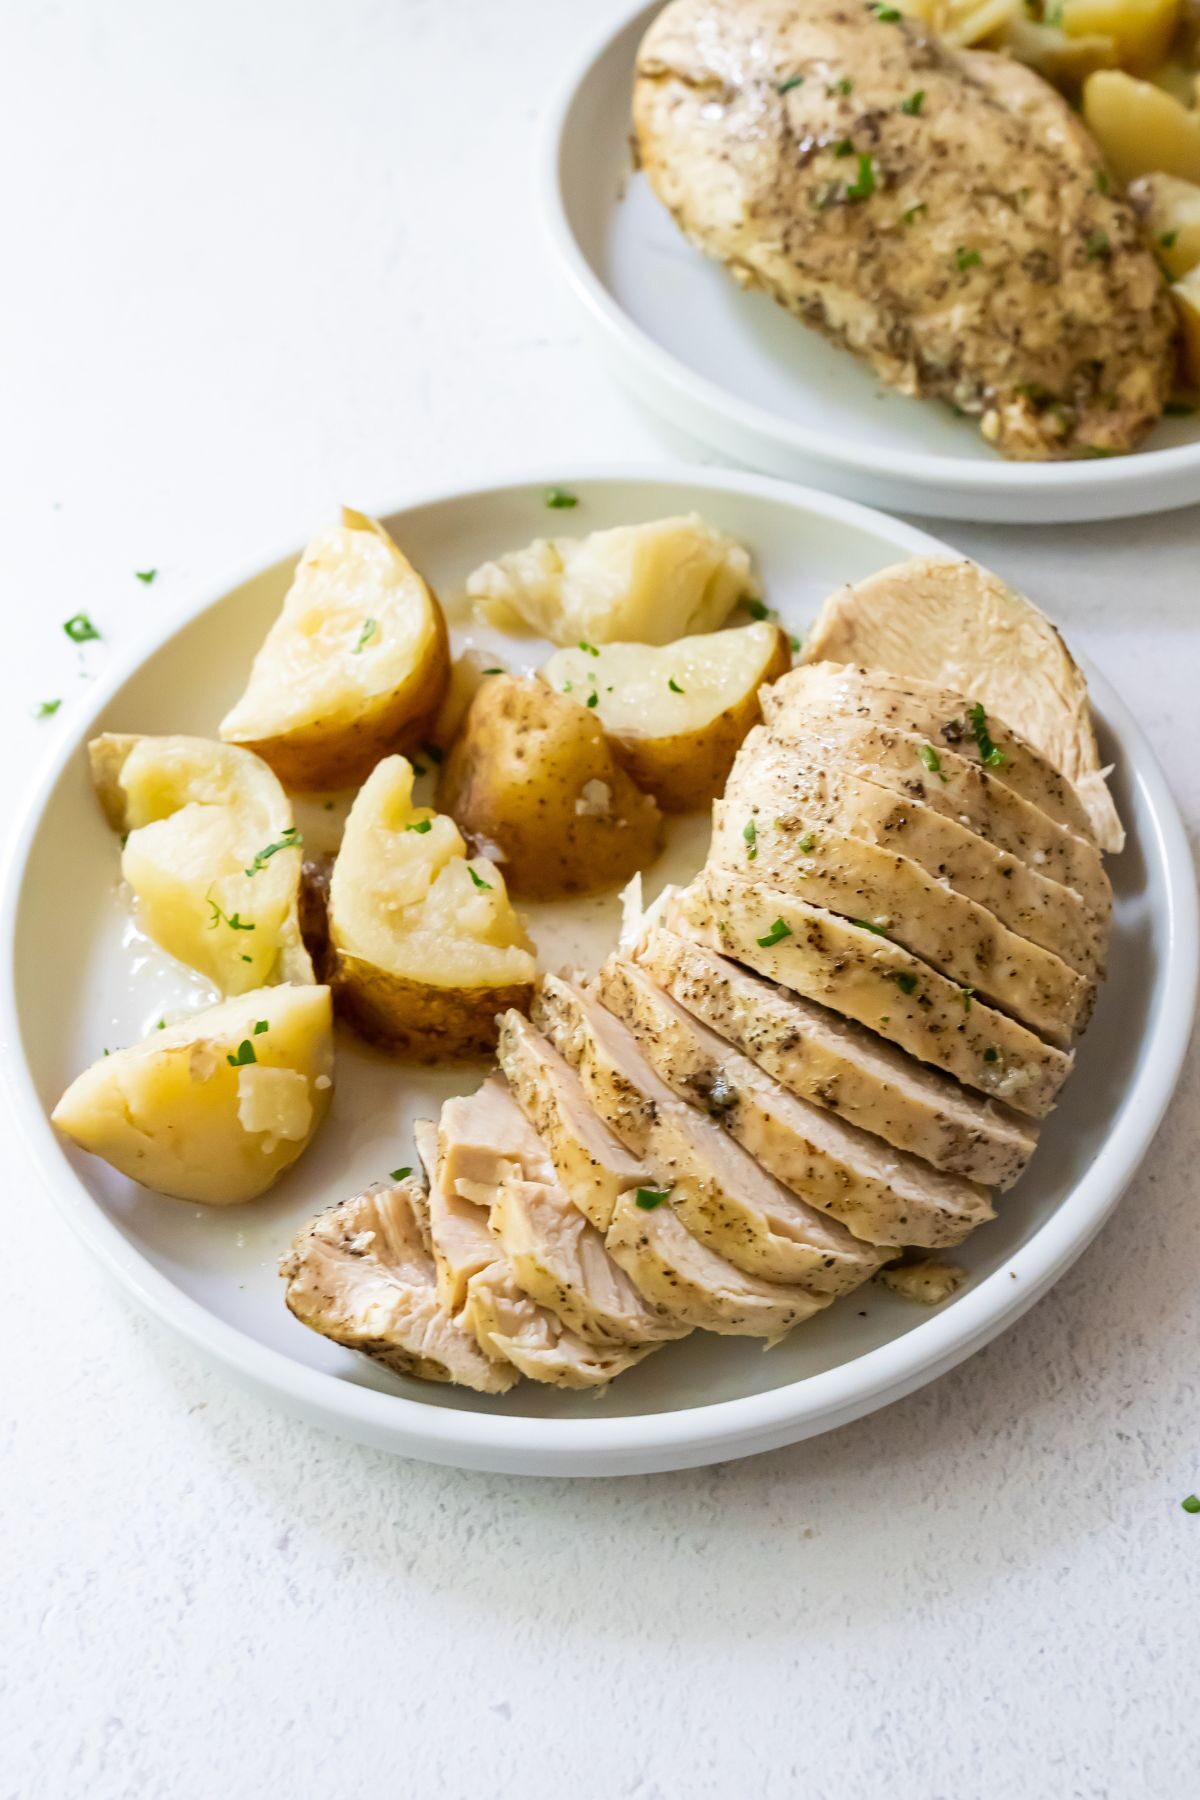 Cooked and sliced chicken with quartered potatoes on a white plate.